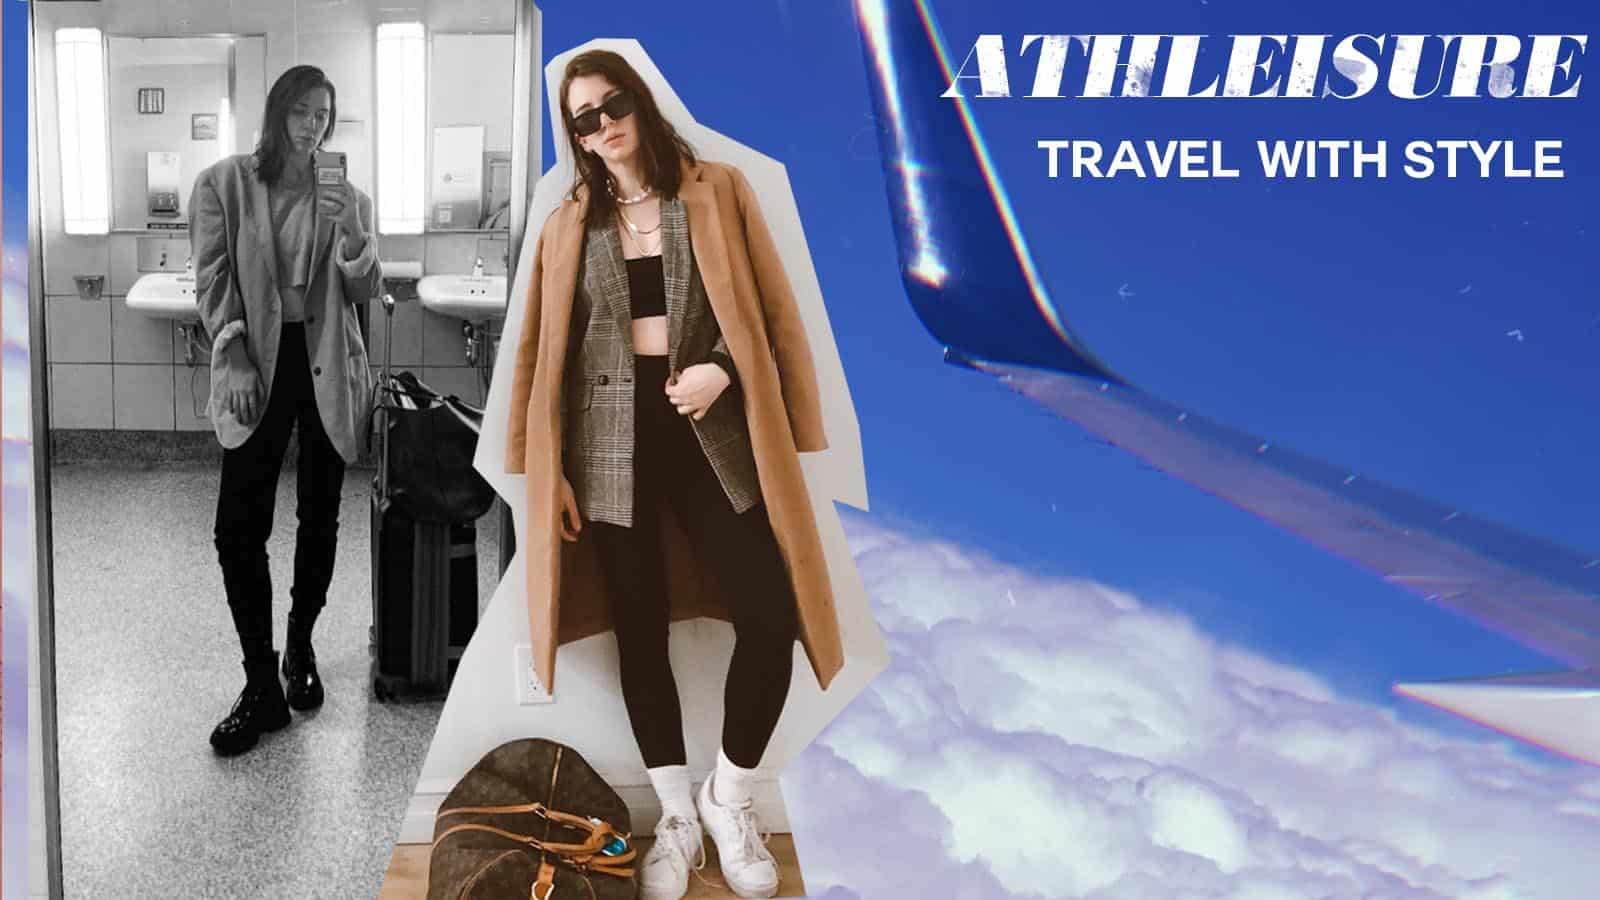 Traveling like an it-girl: how to style an athleisure travel outfit and not look frumpy